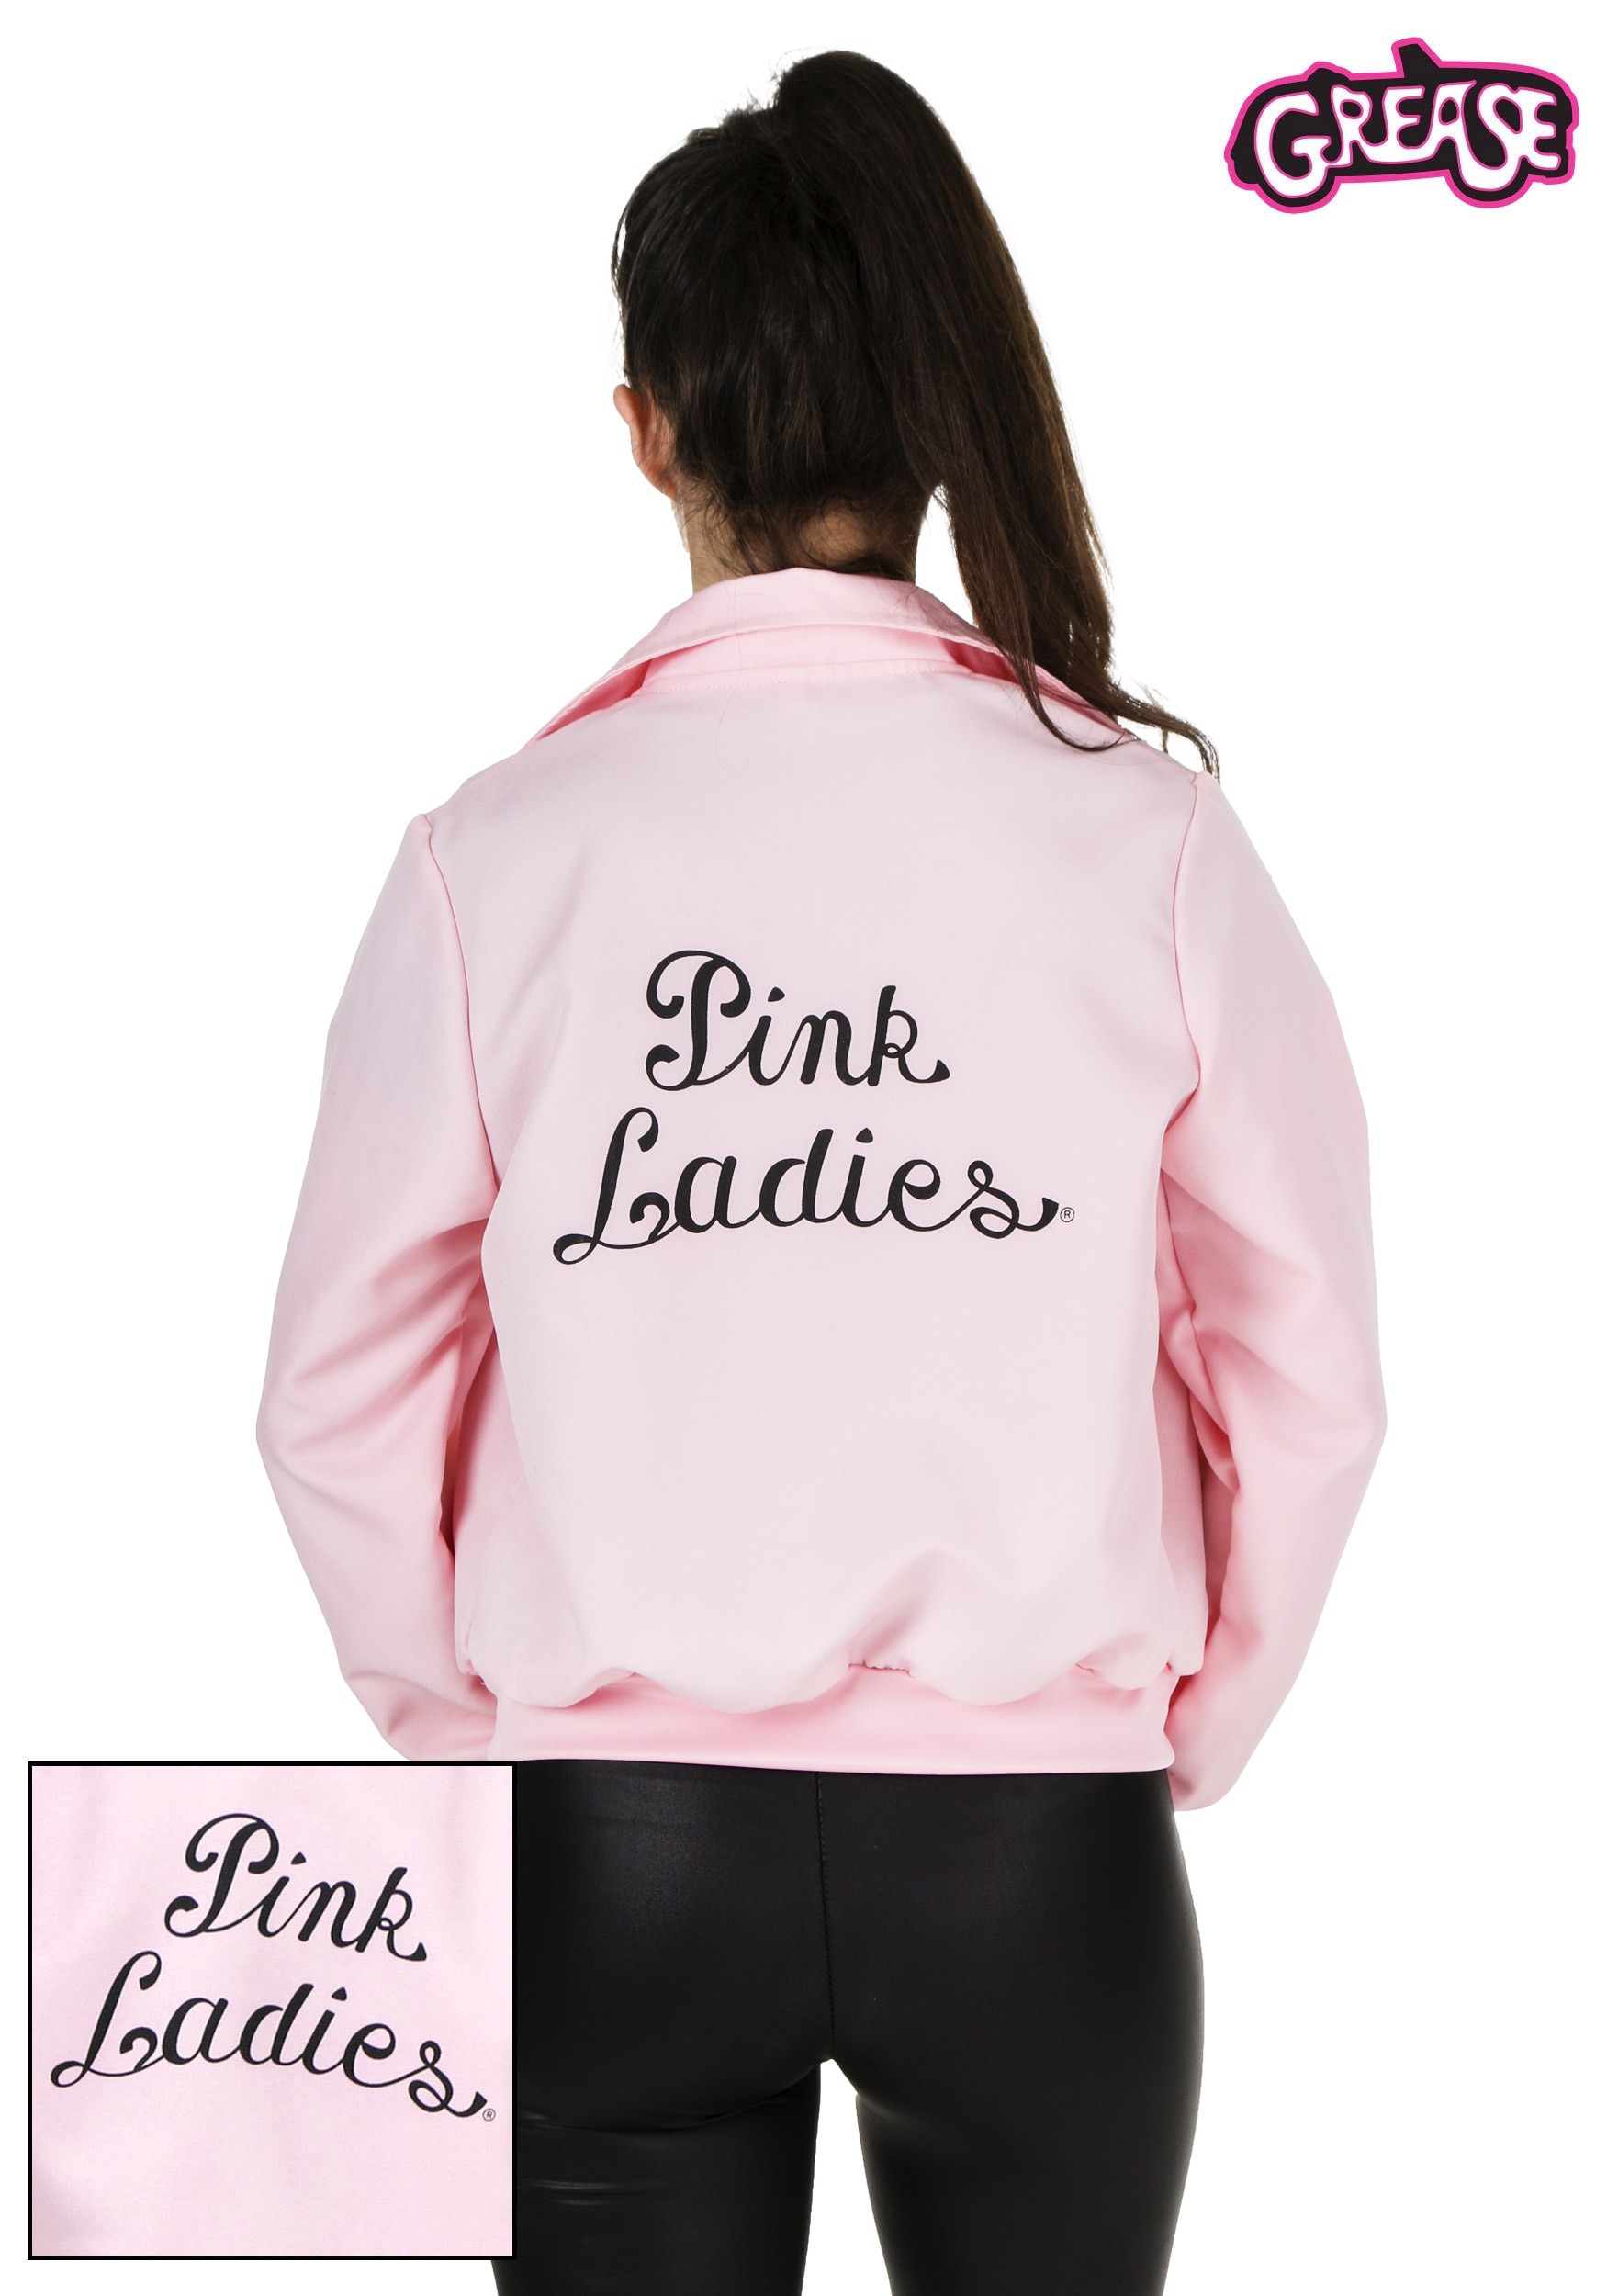 Deluxe Pink Jacket Costume for Plus Size Women